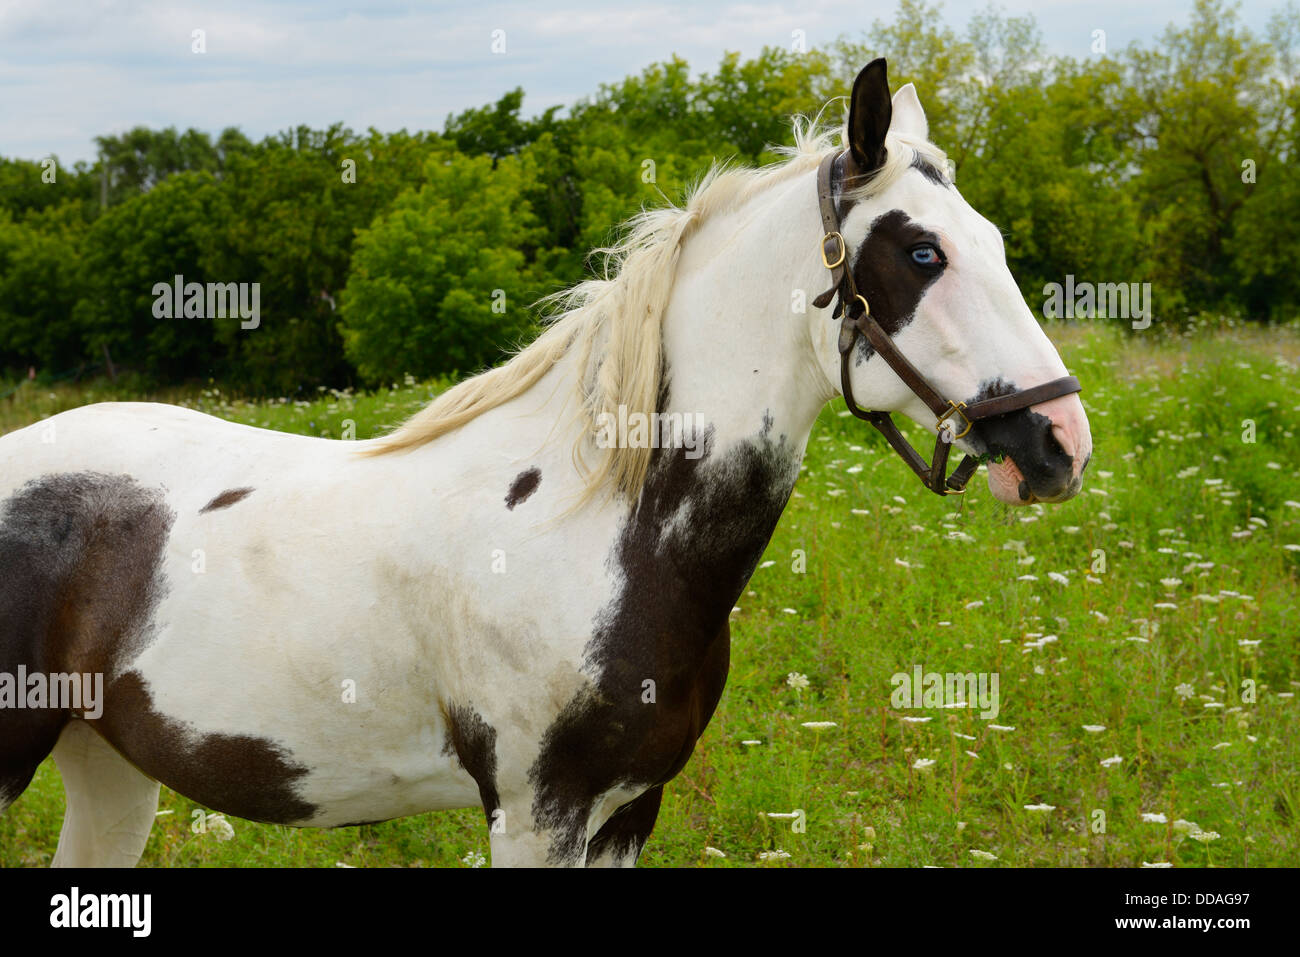 A Paint horse with blue eyes standing in a country field Ontario Canada Stock Photo